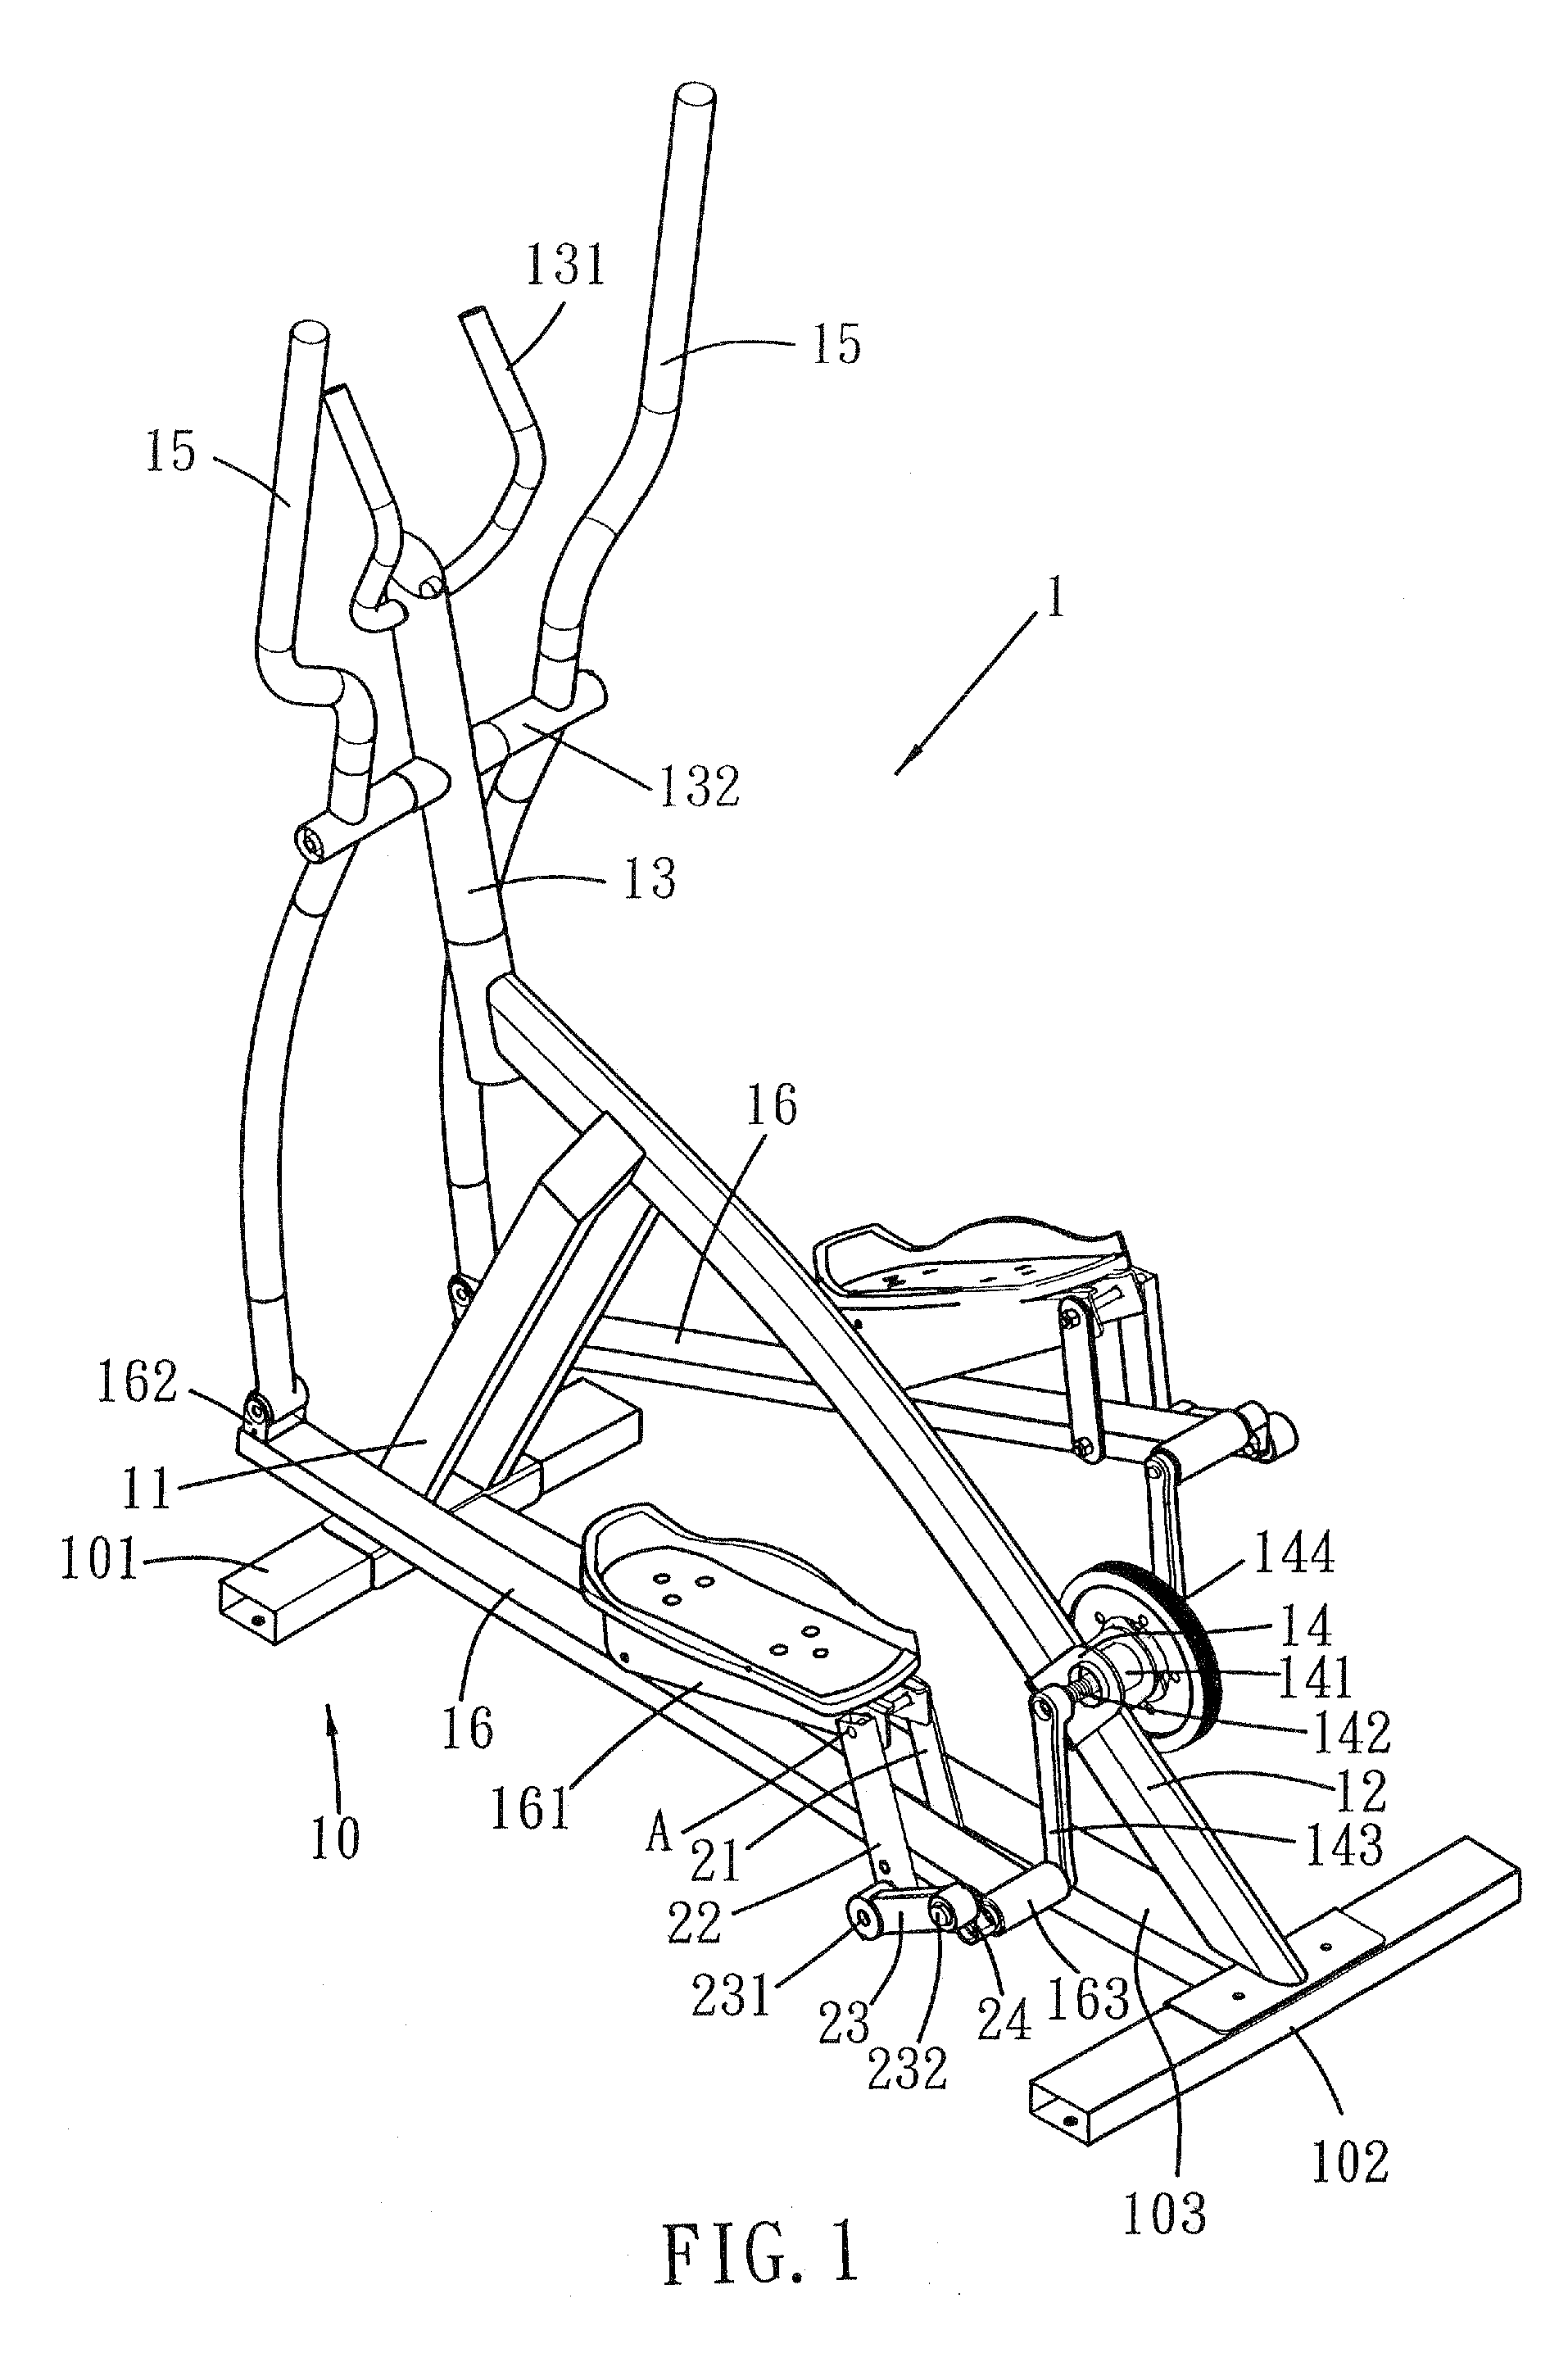 Elliptical excise apparatus capable of increase exercise distance